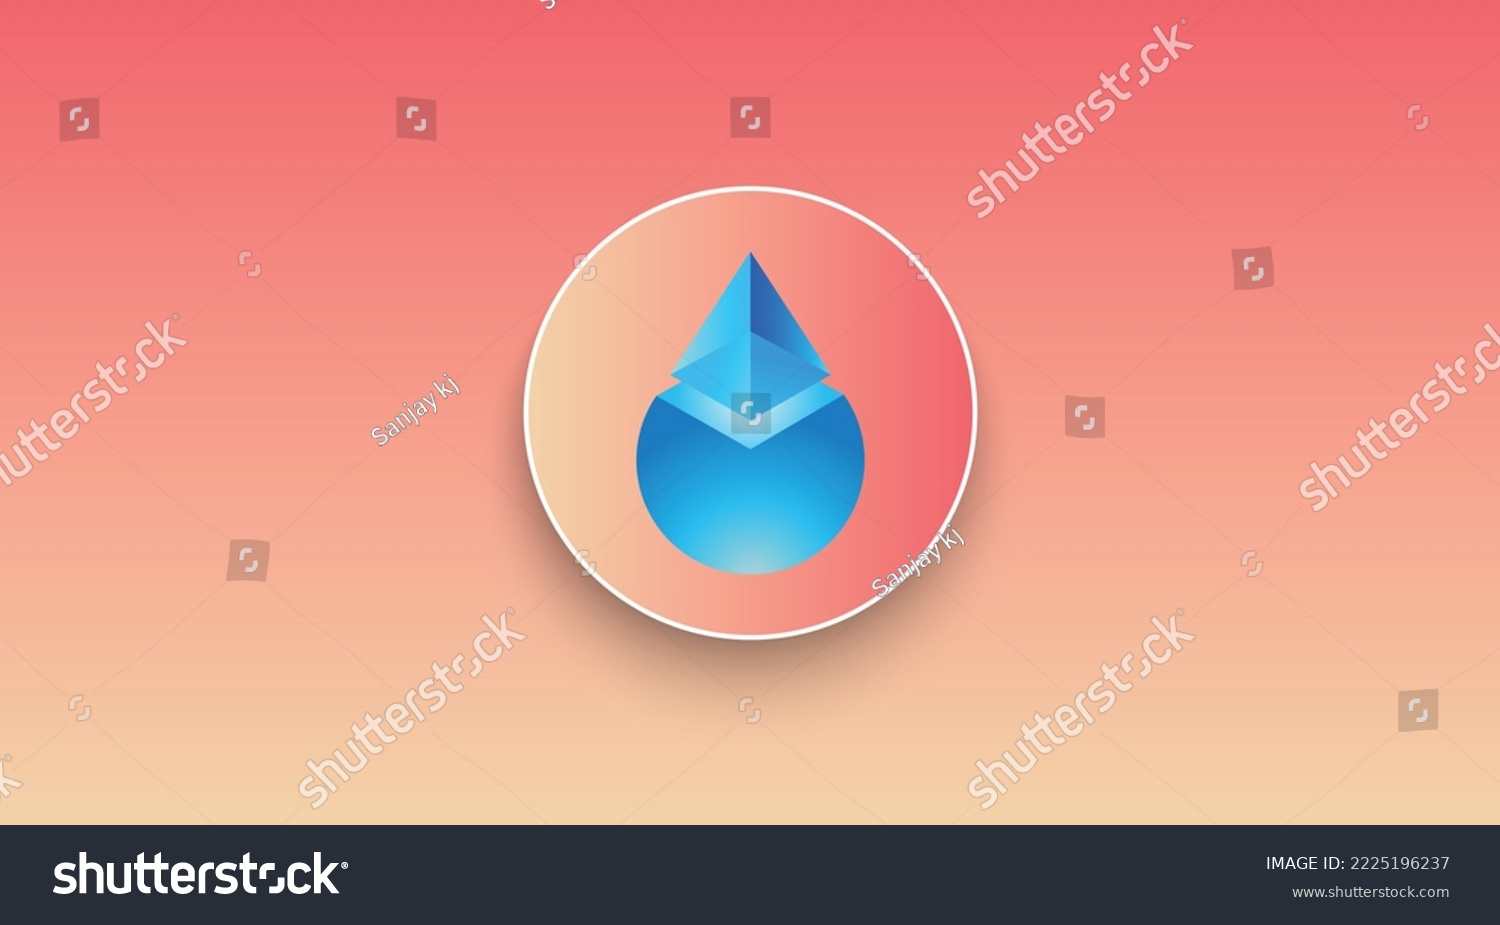 SVG of Lido DAO, LDO Token cryptocurrency logo on isolated background with copy space. 3d vector illustration of Lido DAO, LDO token icon banner. svg